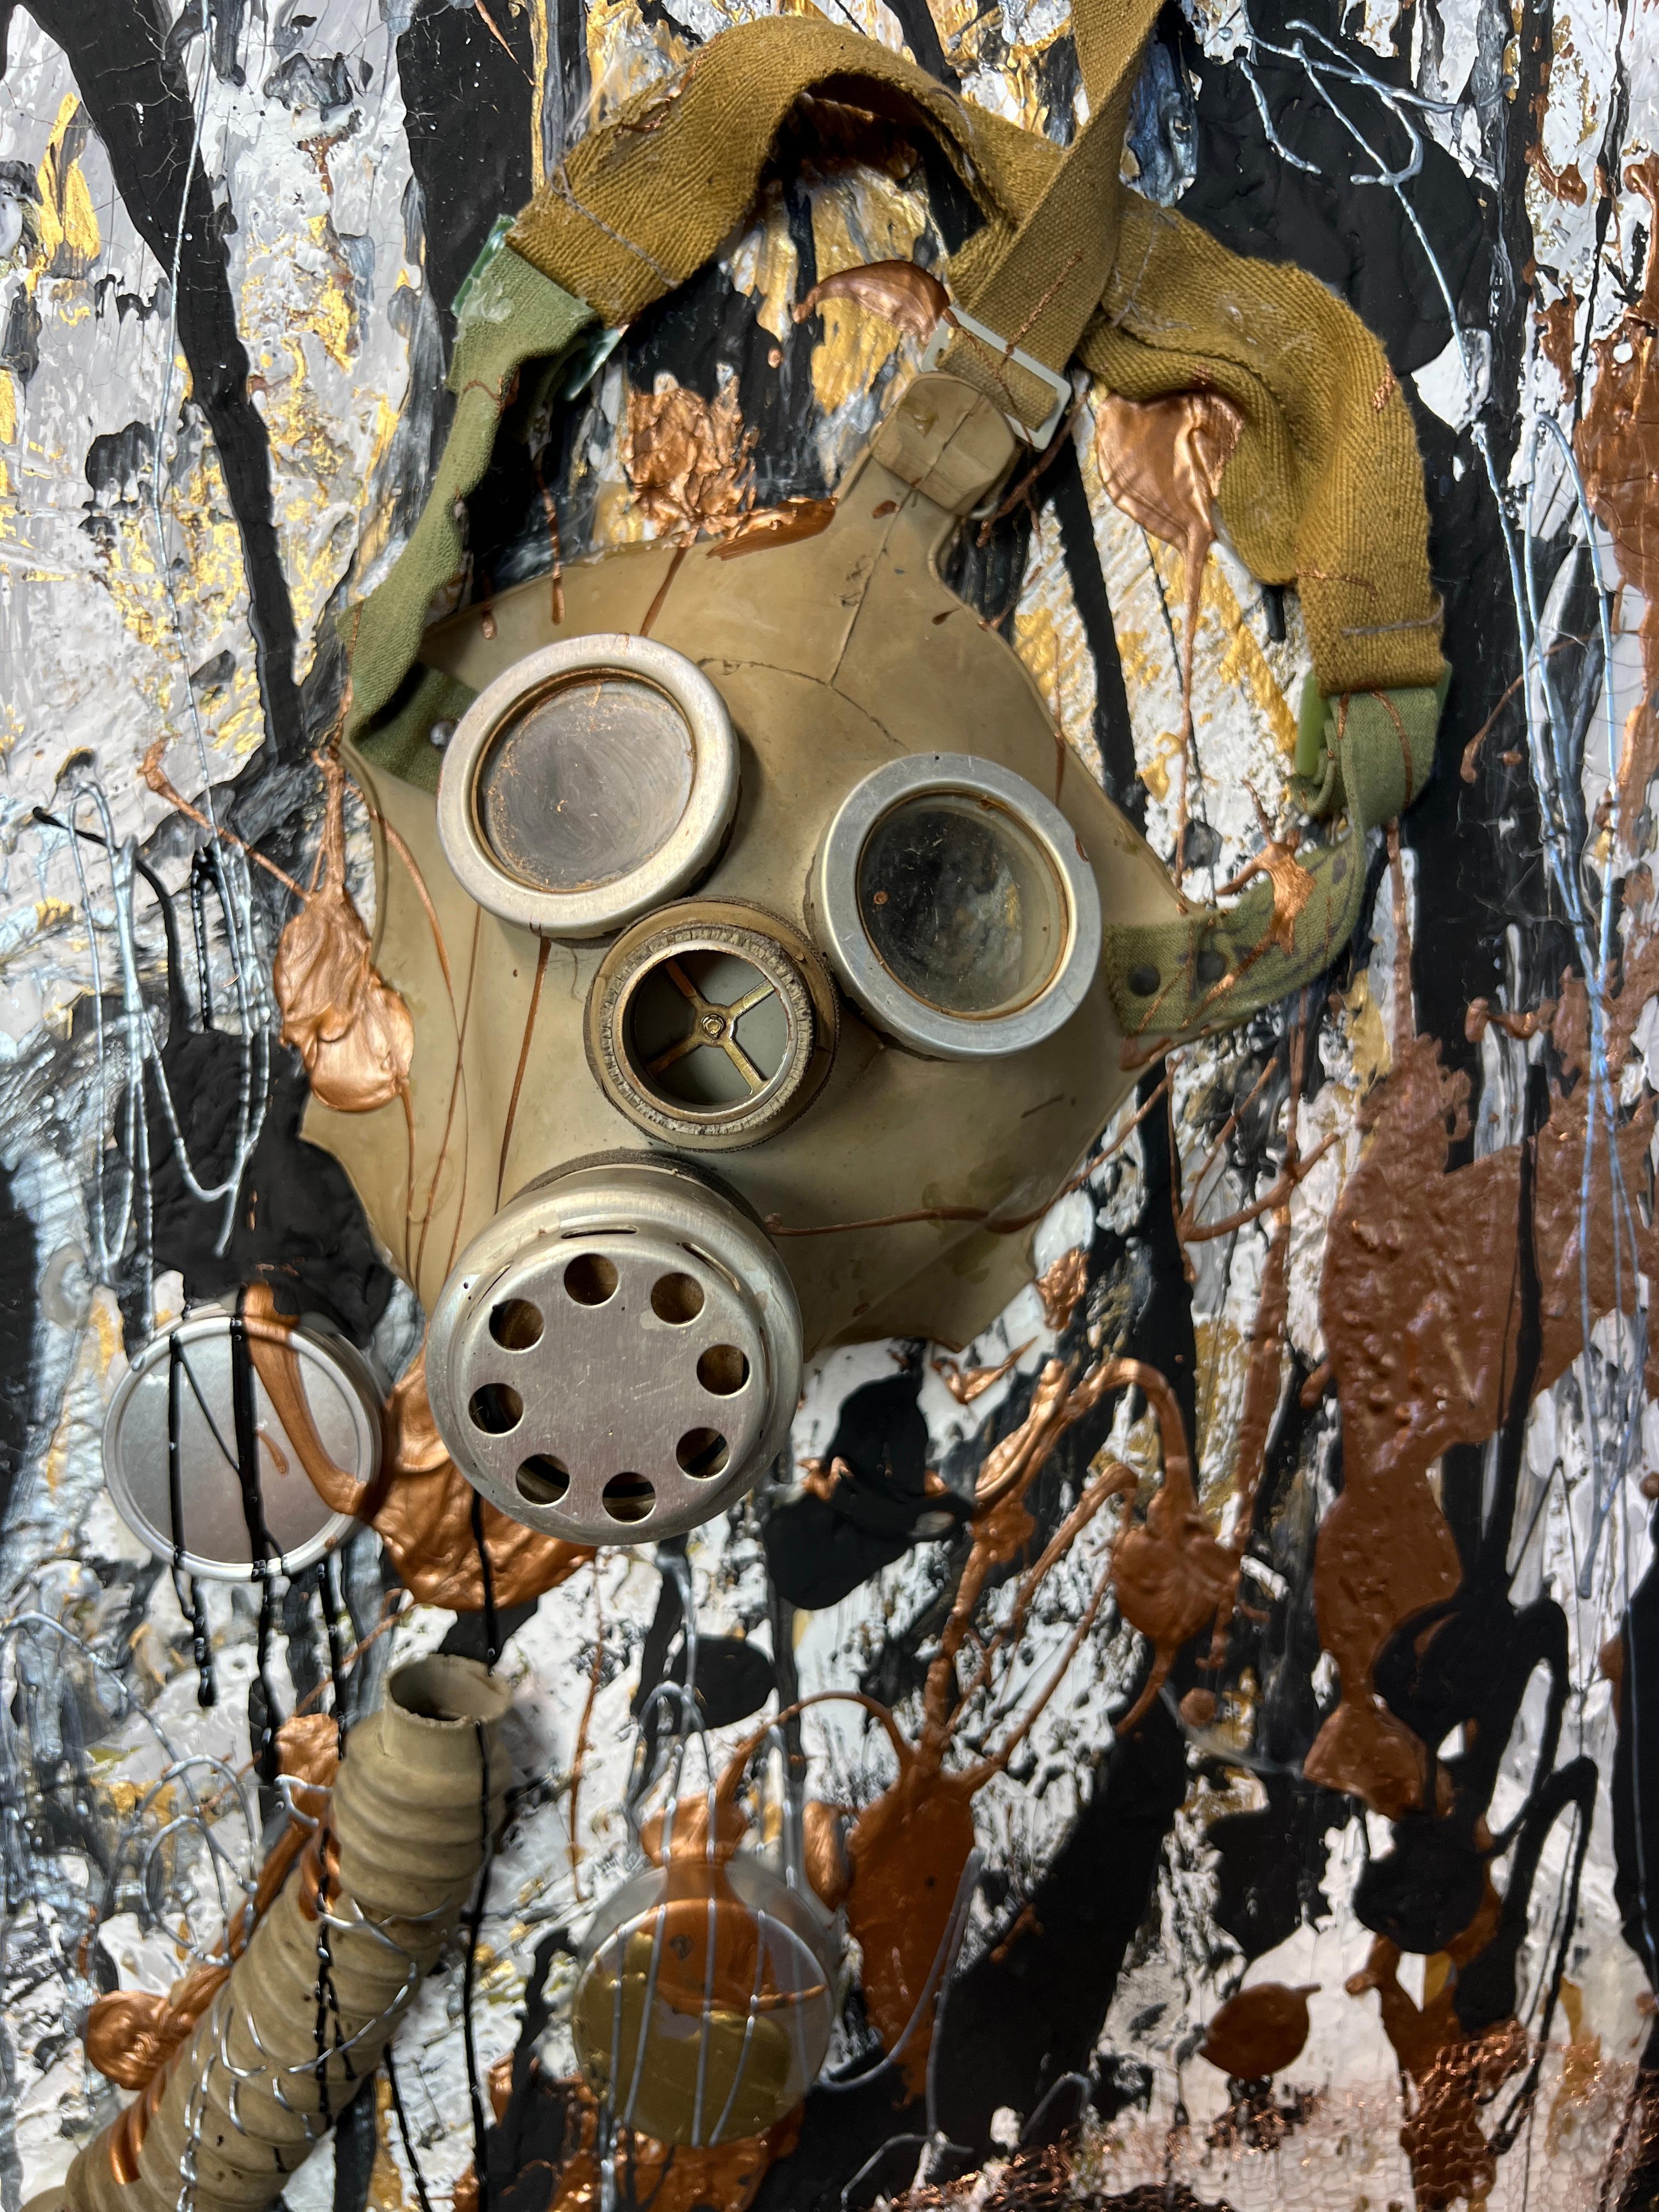 After 77 Years, Again in Fear? - Mixed Media Assemblage on Canvas 1